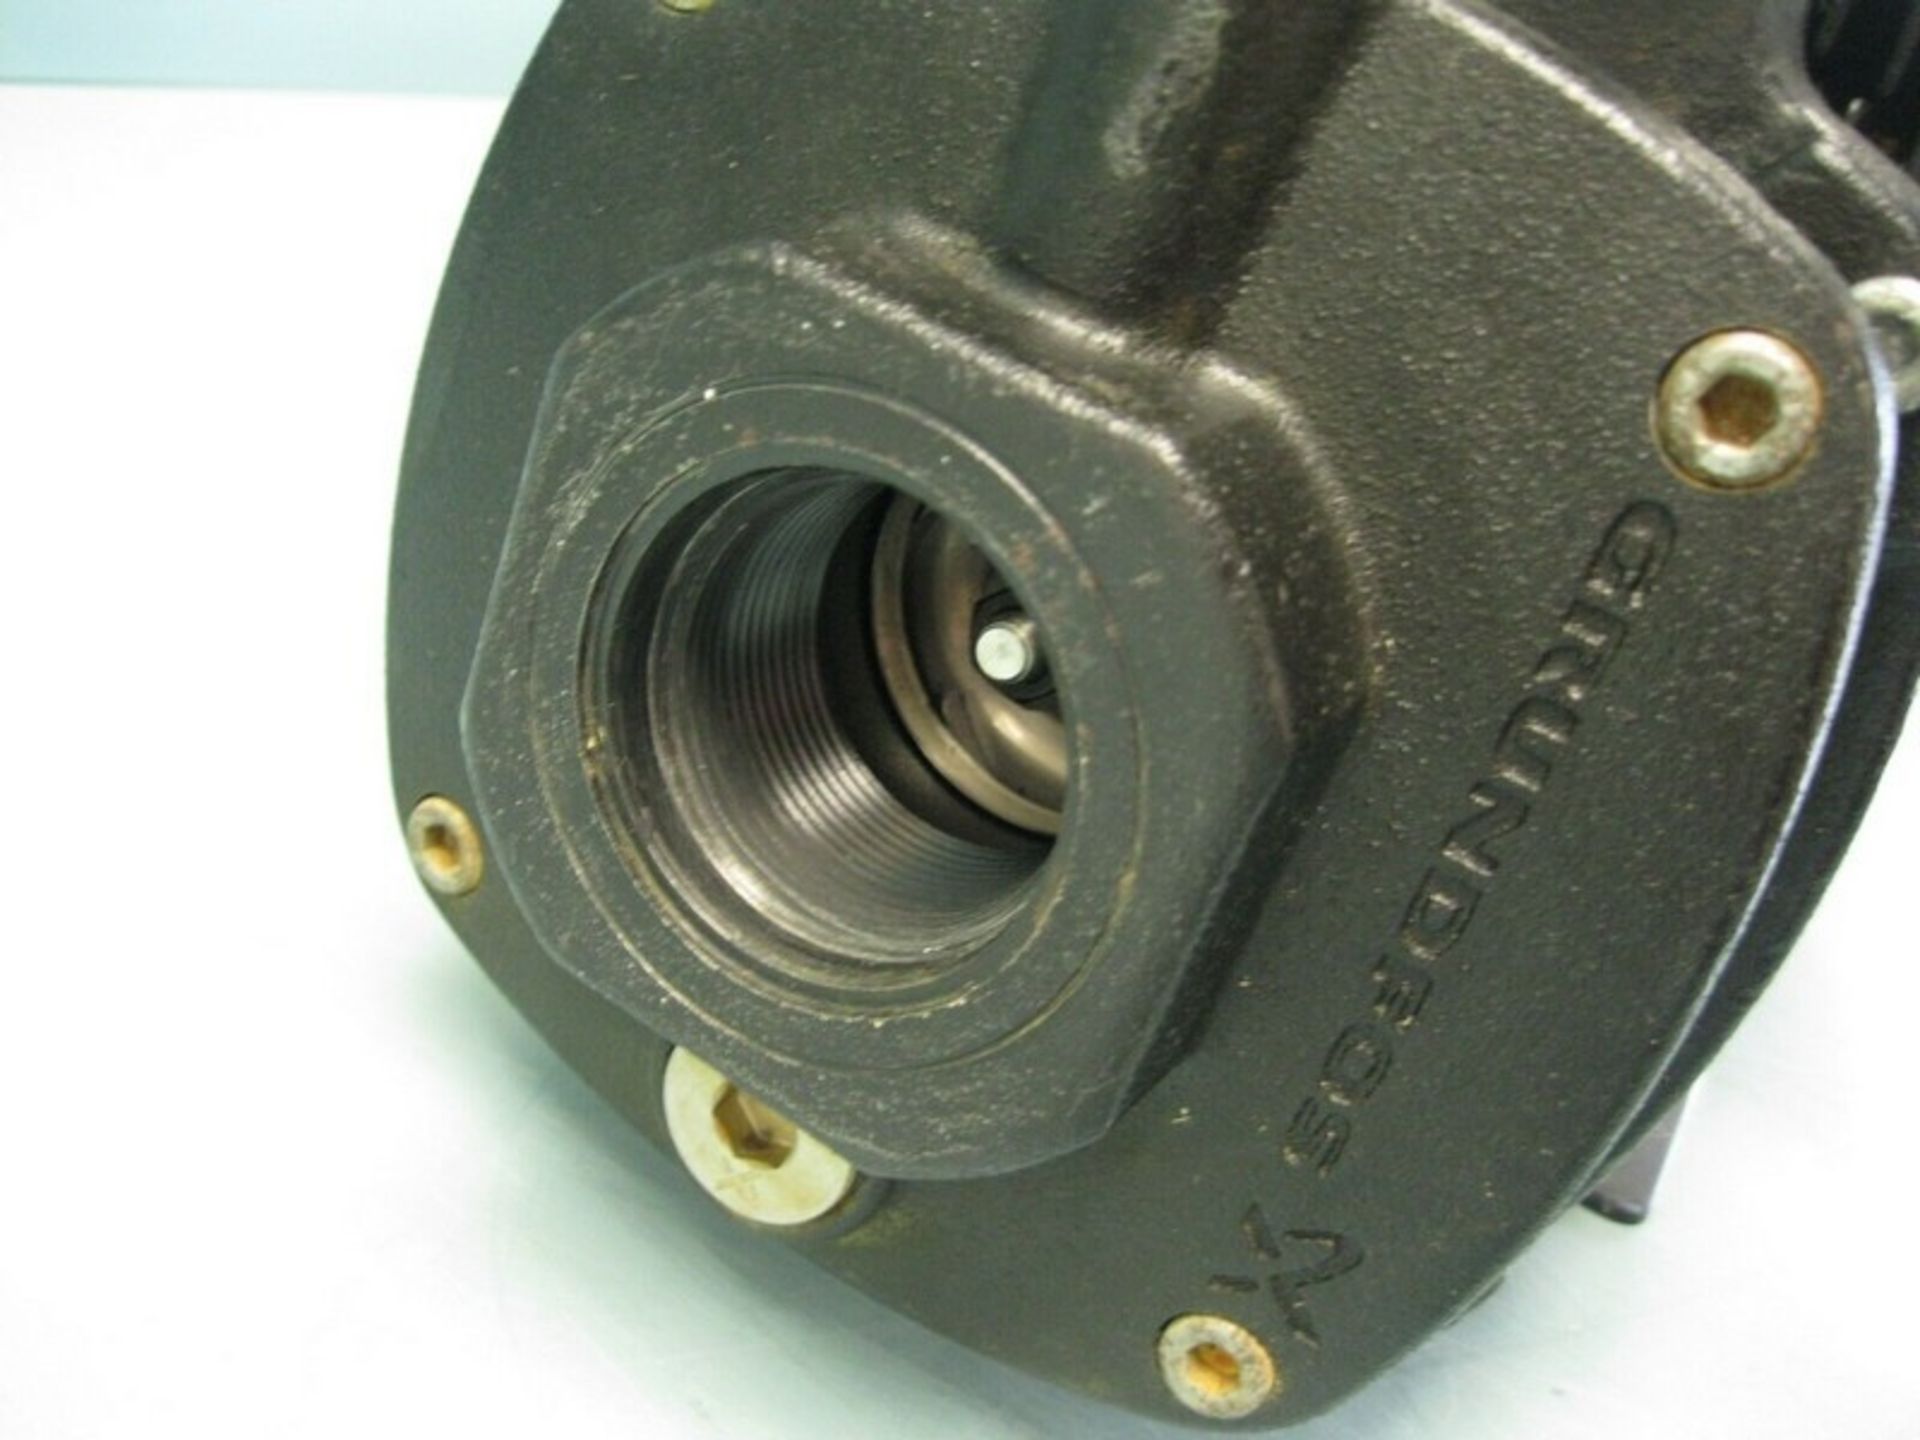 1-1/2" NPT Grundfos CME10-2 Cast Iron End Suction Pump 3 HP Motor (Located Springfield, NH)(Handling - Image 4 of 9